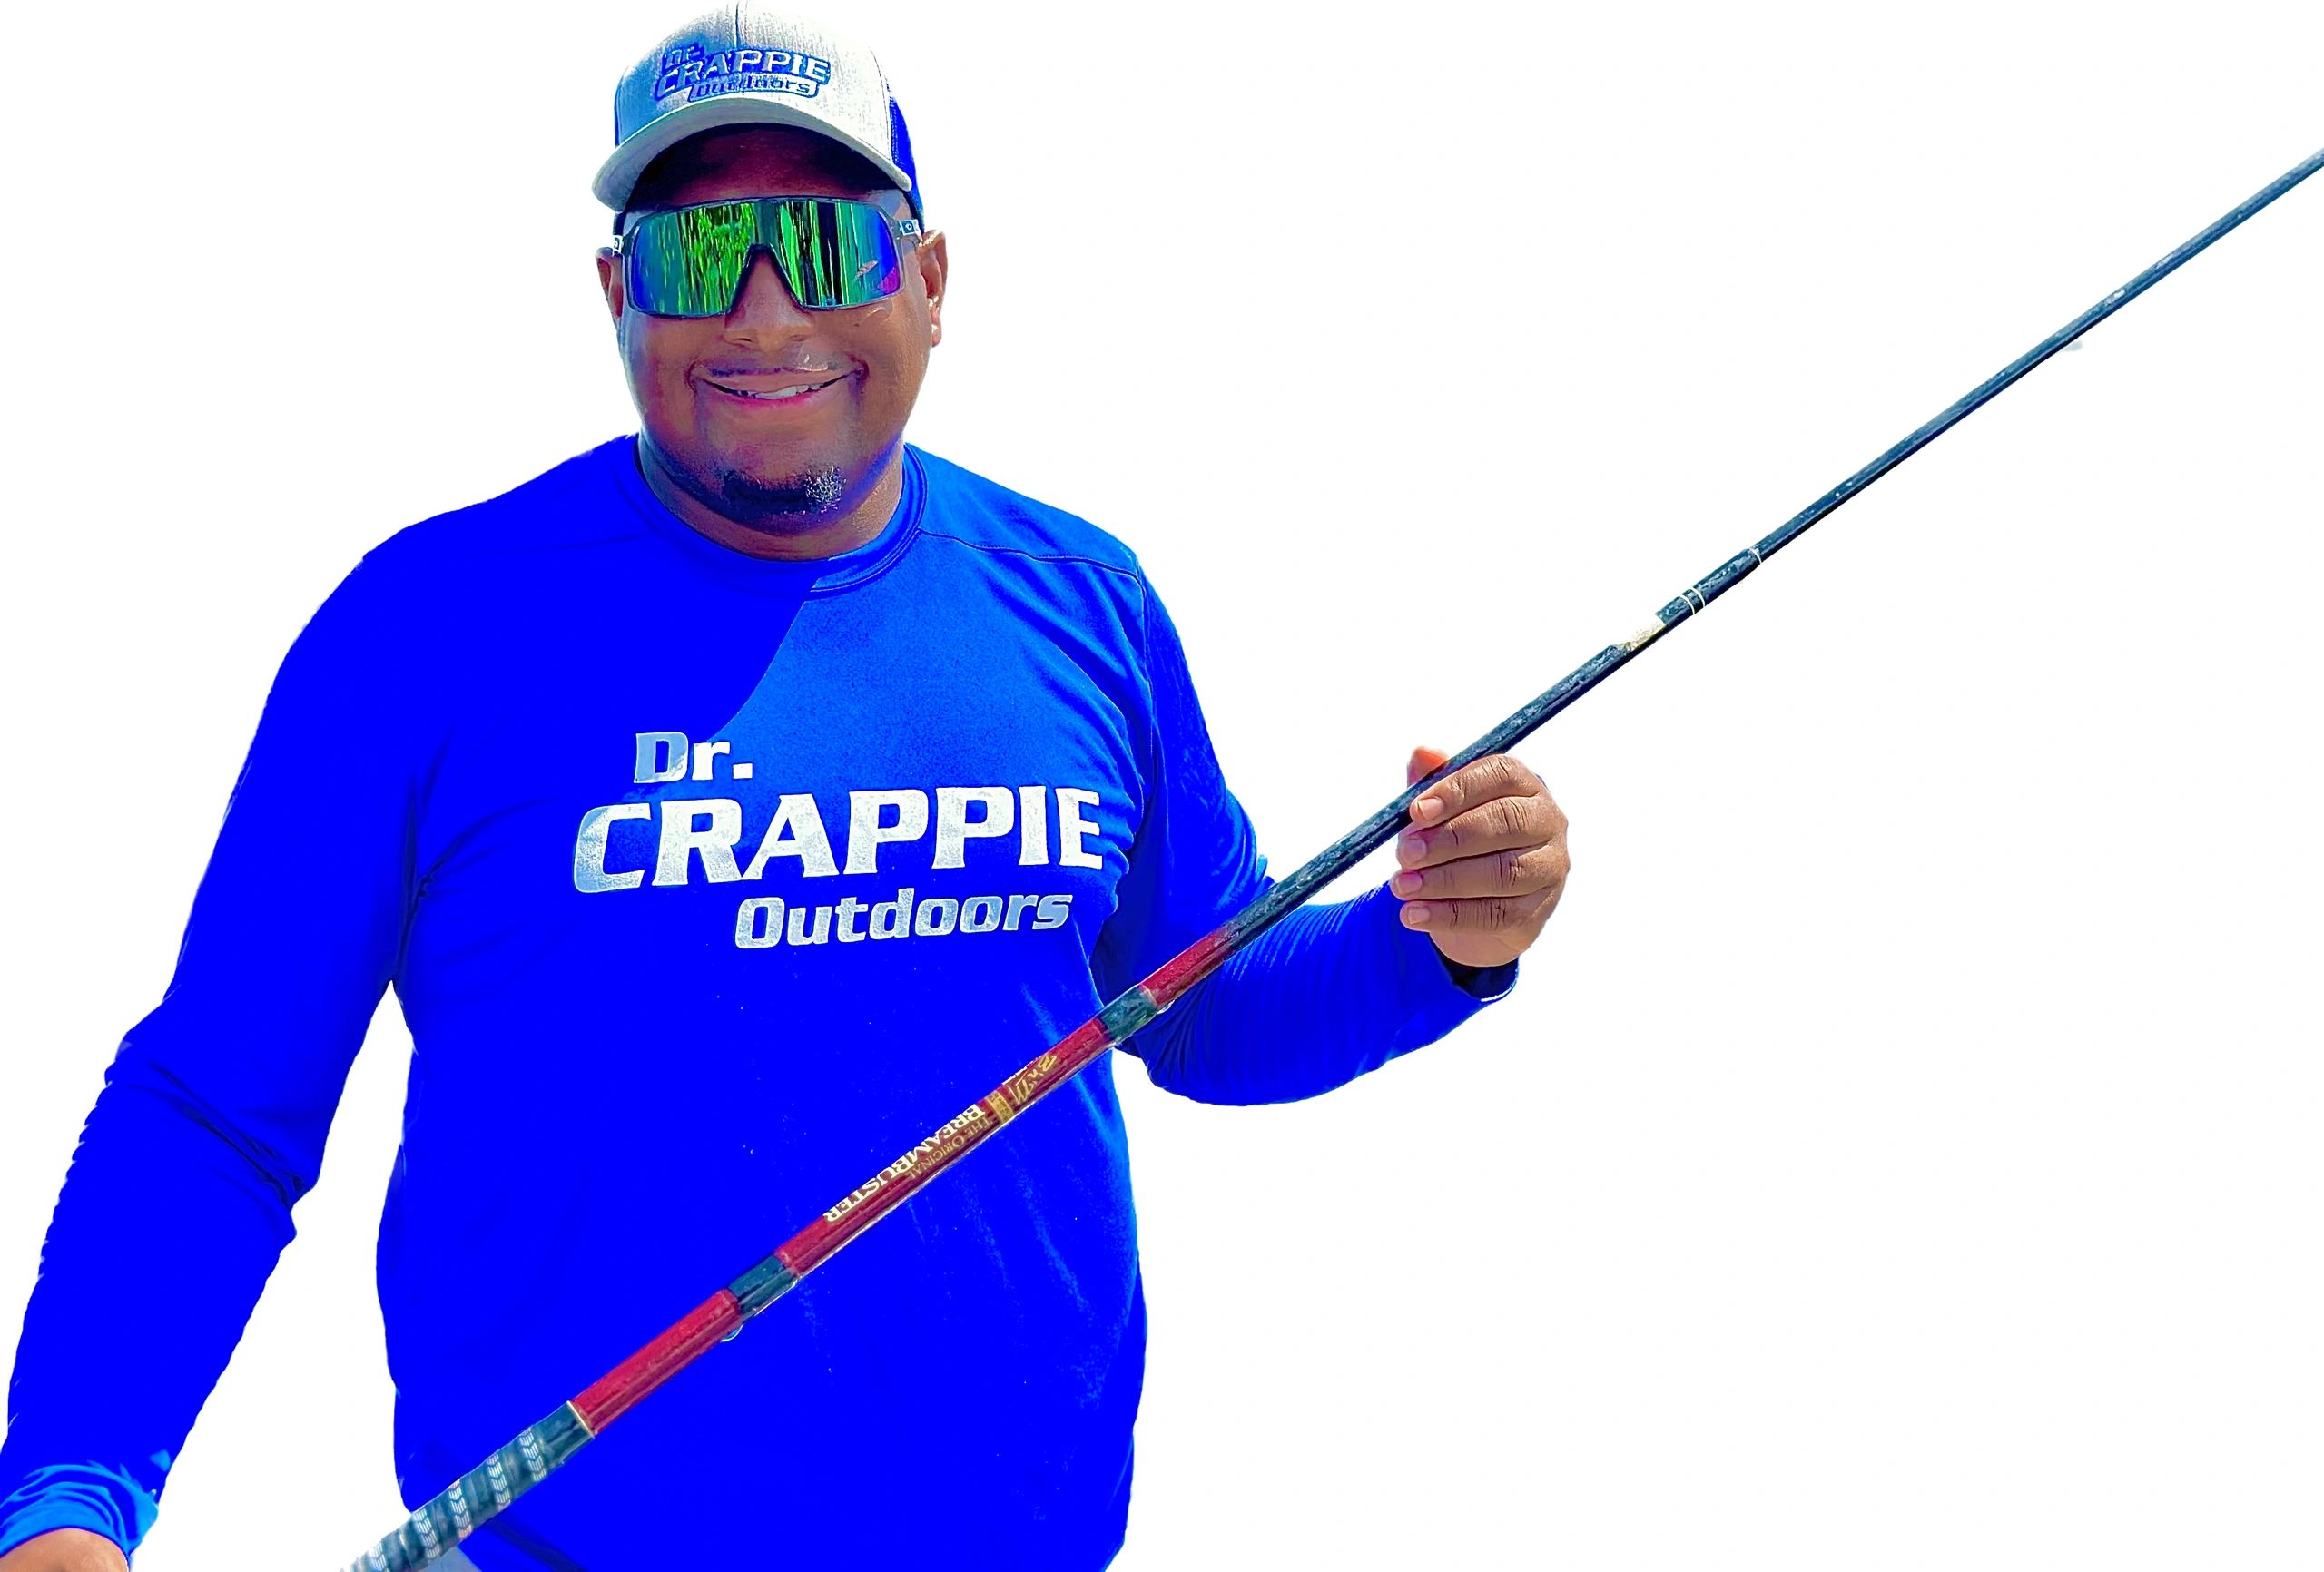 Dr. Crappie Outdoors - Home